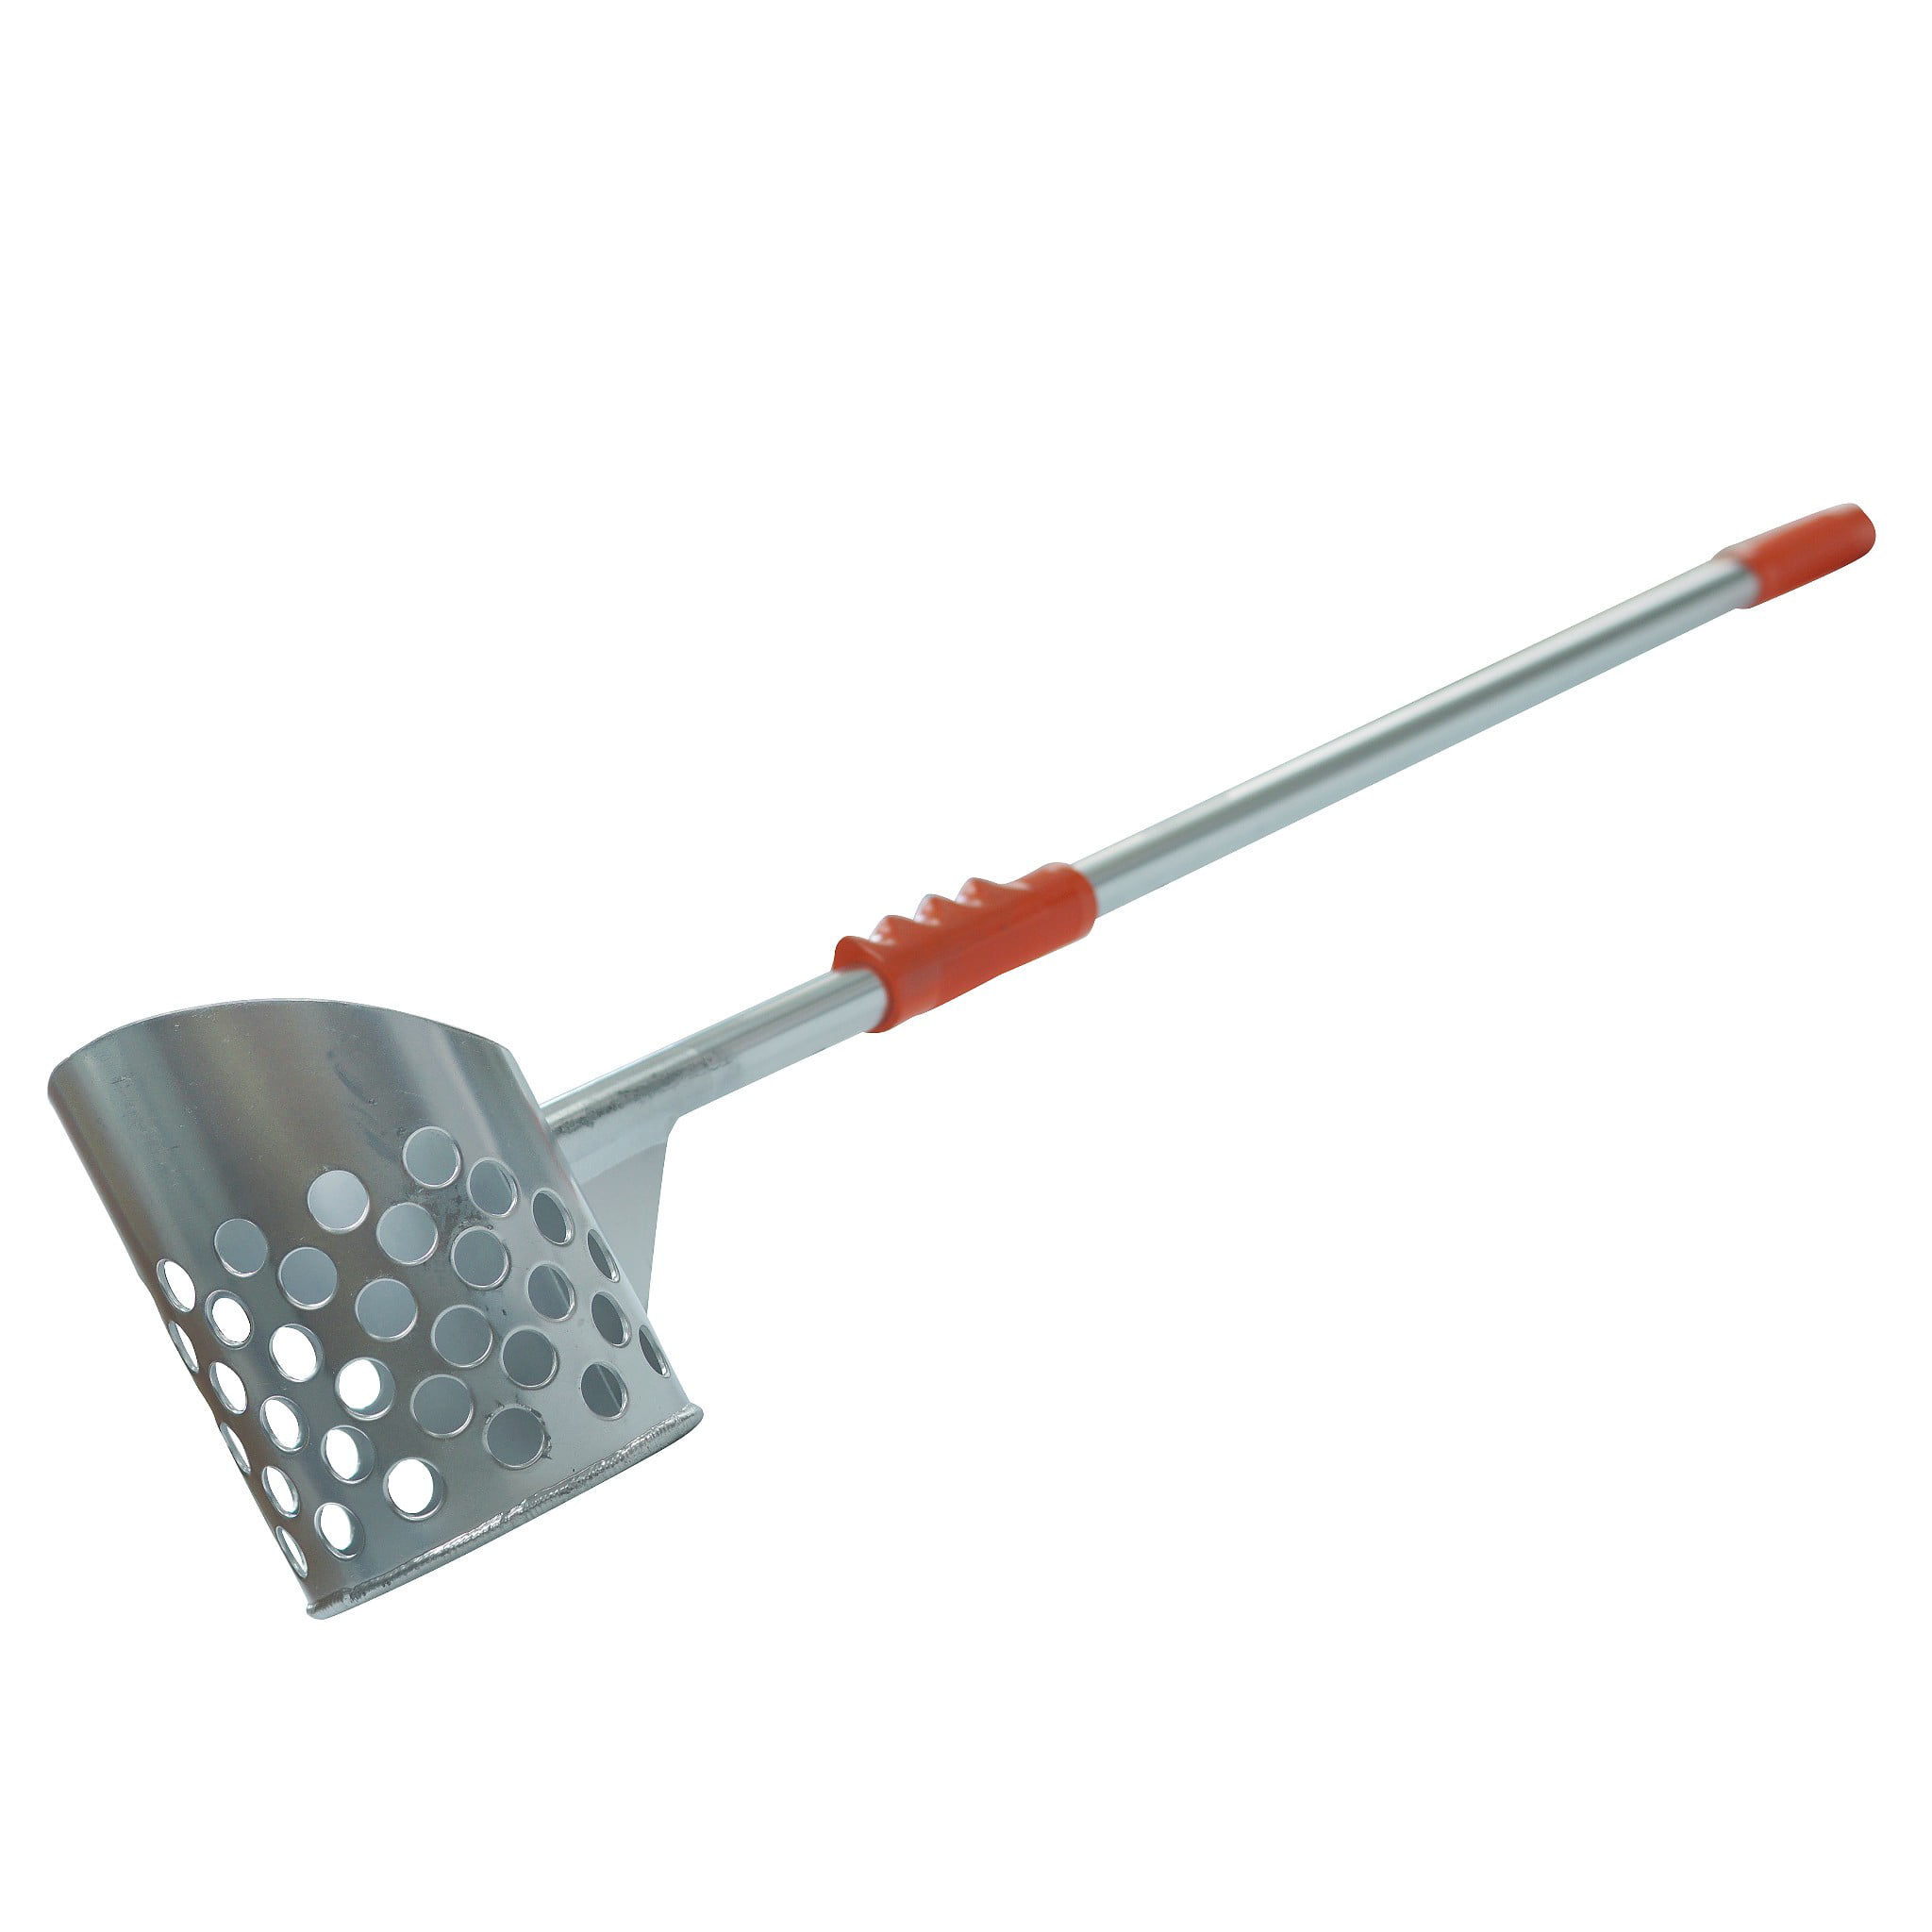 Sand Scoop For Metal Detecting Treasure Hunting Sifter Beach Gold Shovel Mining 